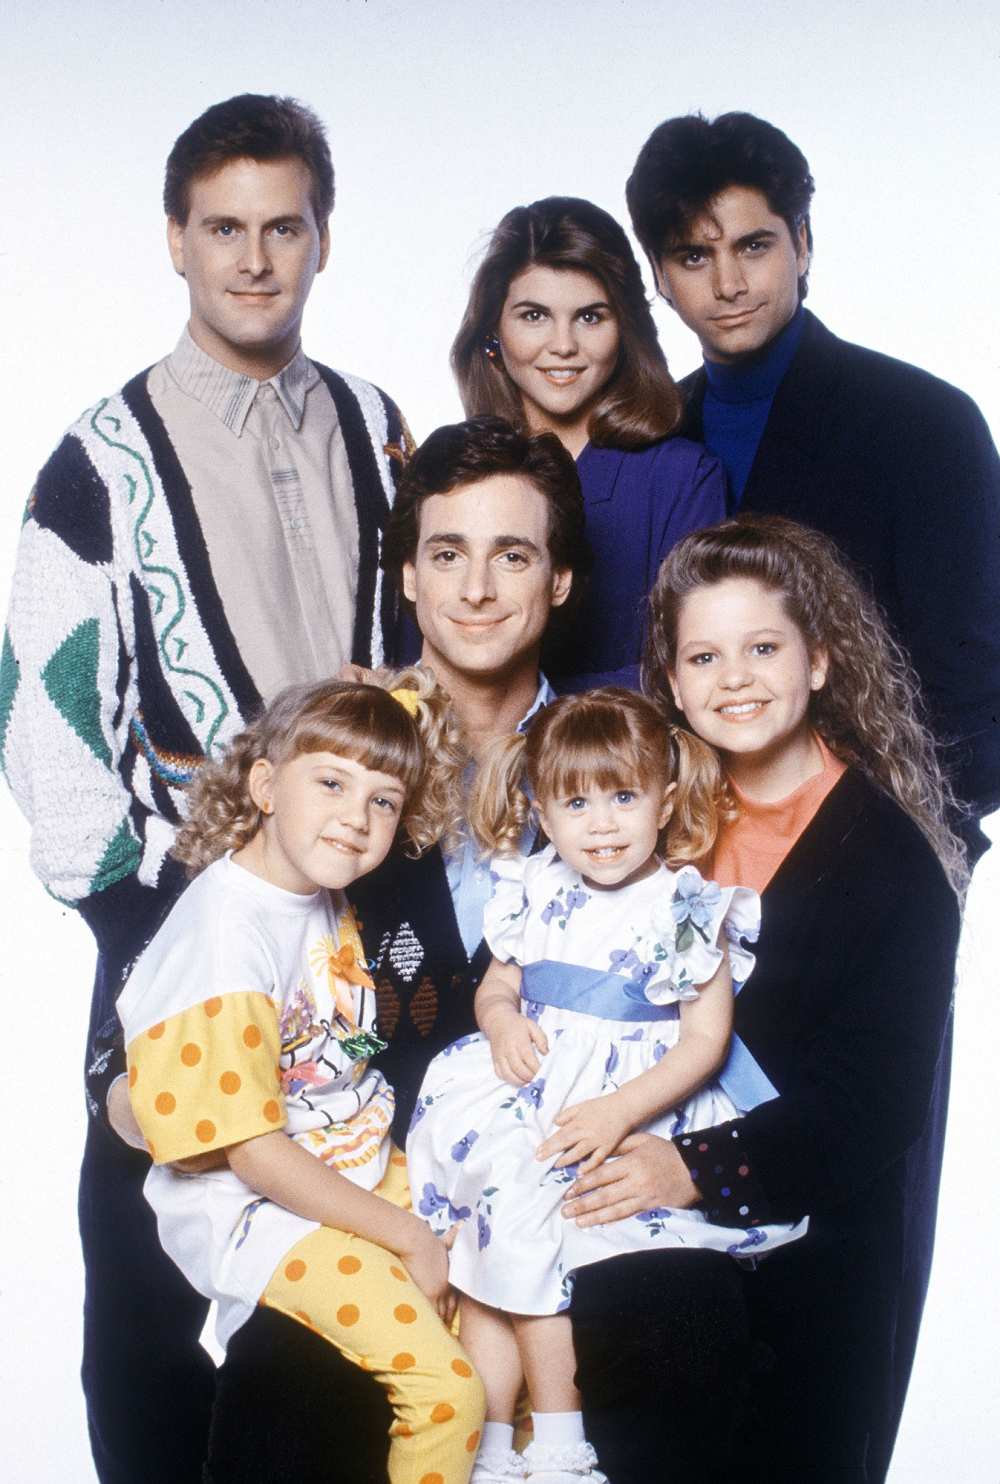 Mary-Kate and Ashley Olsen Pay Tribute to Bob Saget After Shocking Death Full House Cast